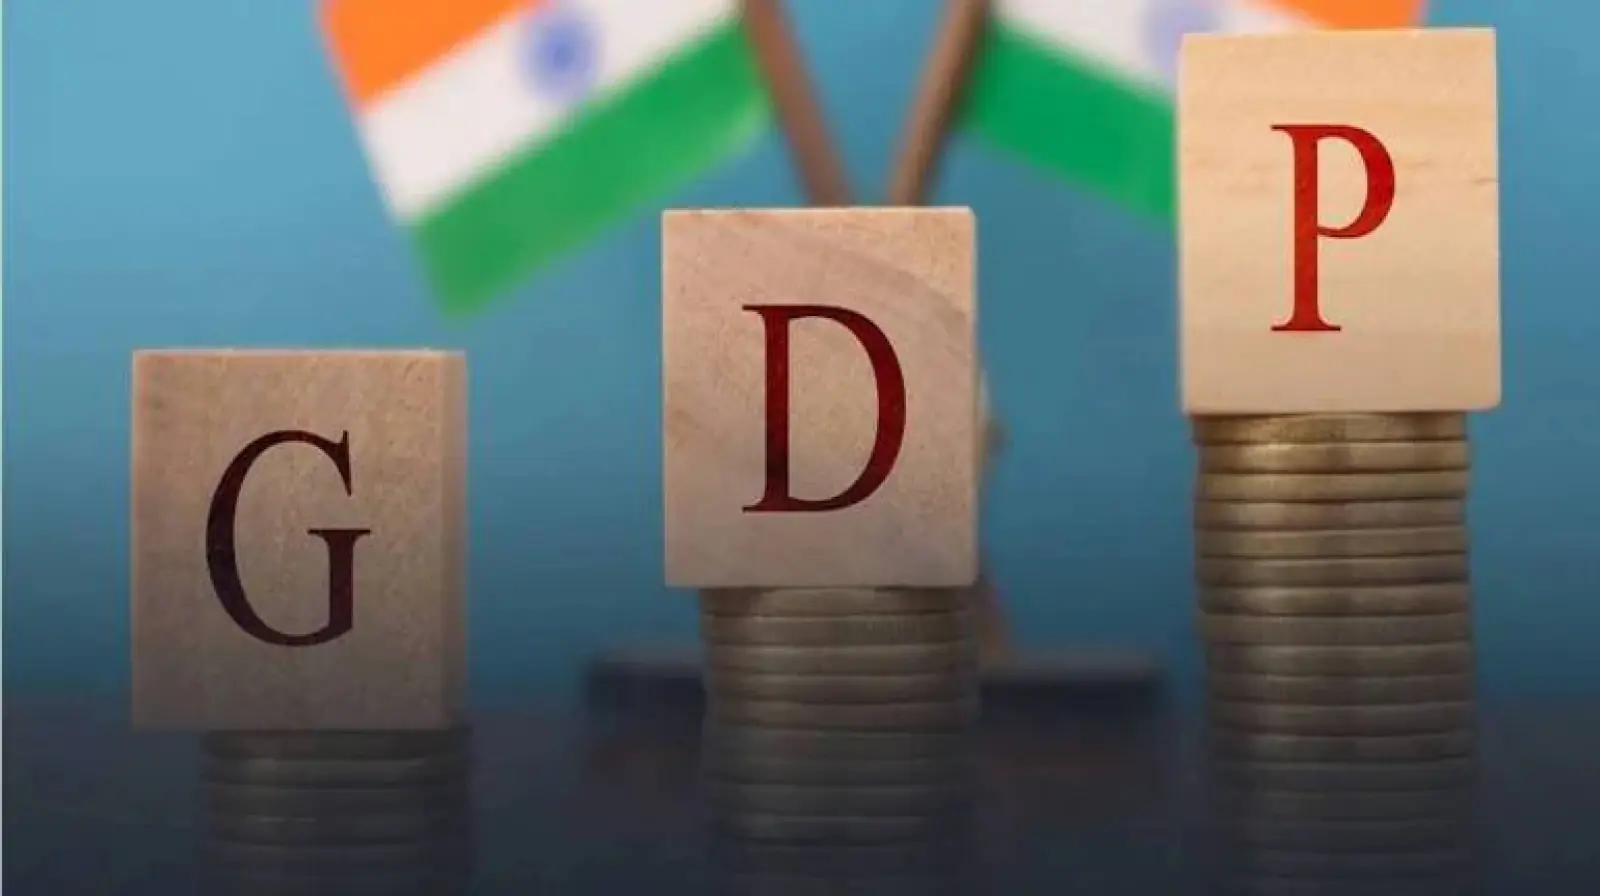 Indian economic growth rate will be 6.6 percent in the current financial year, rating agency estimated